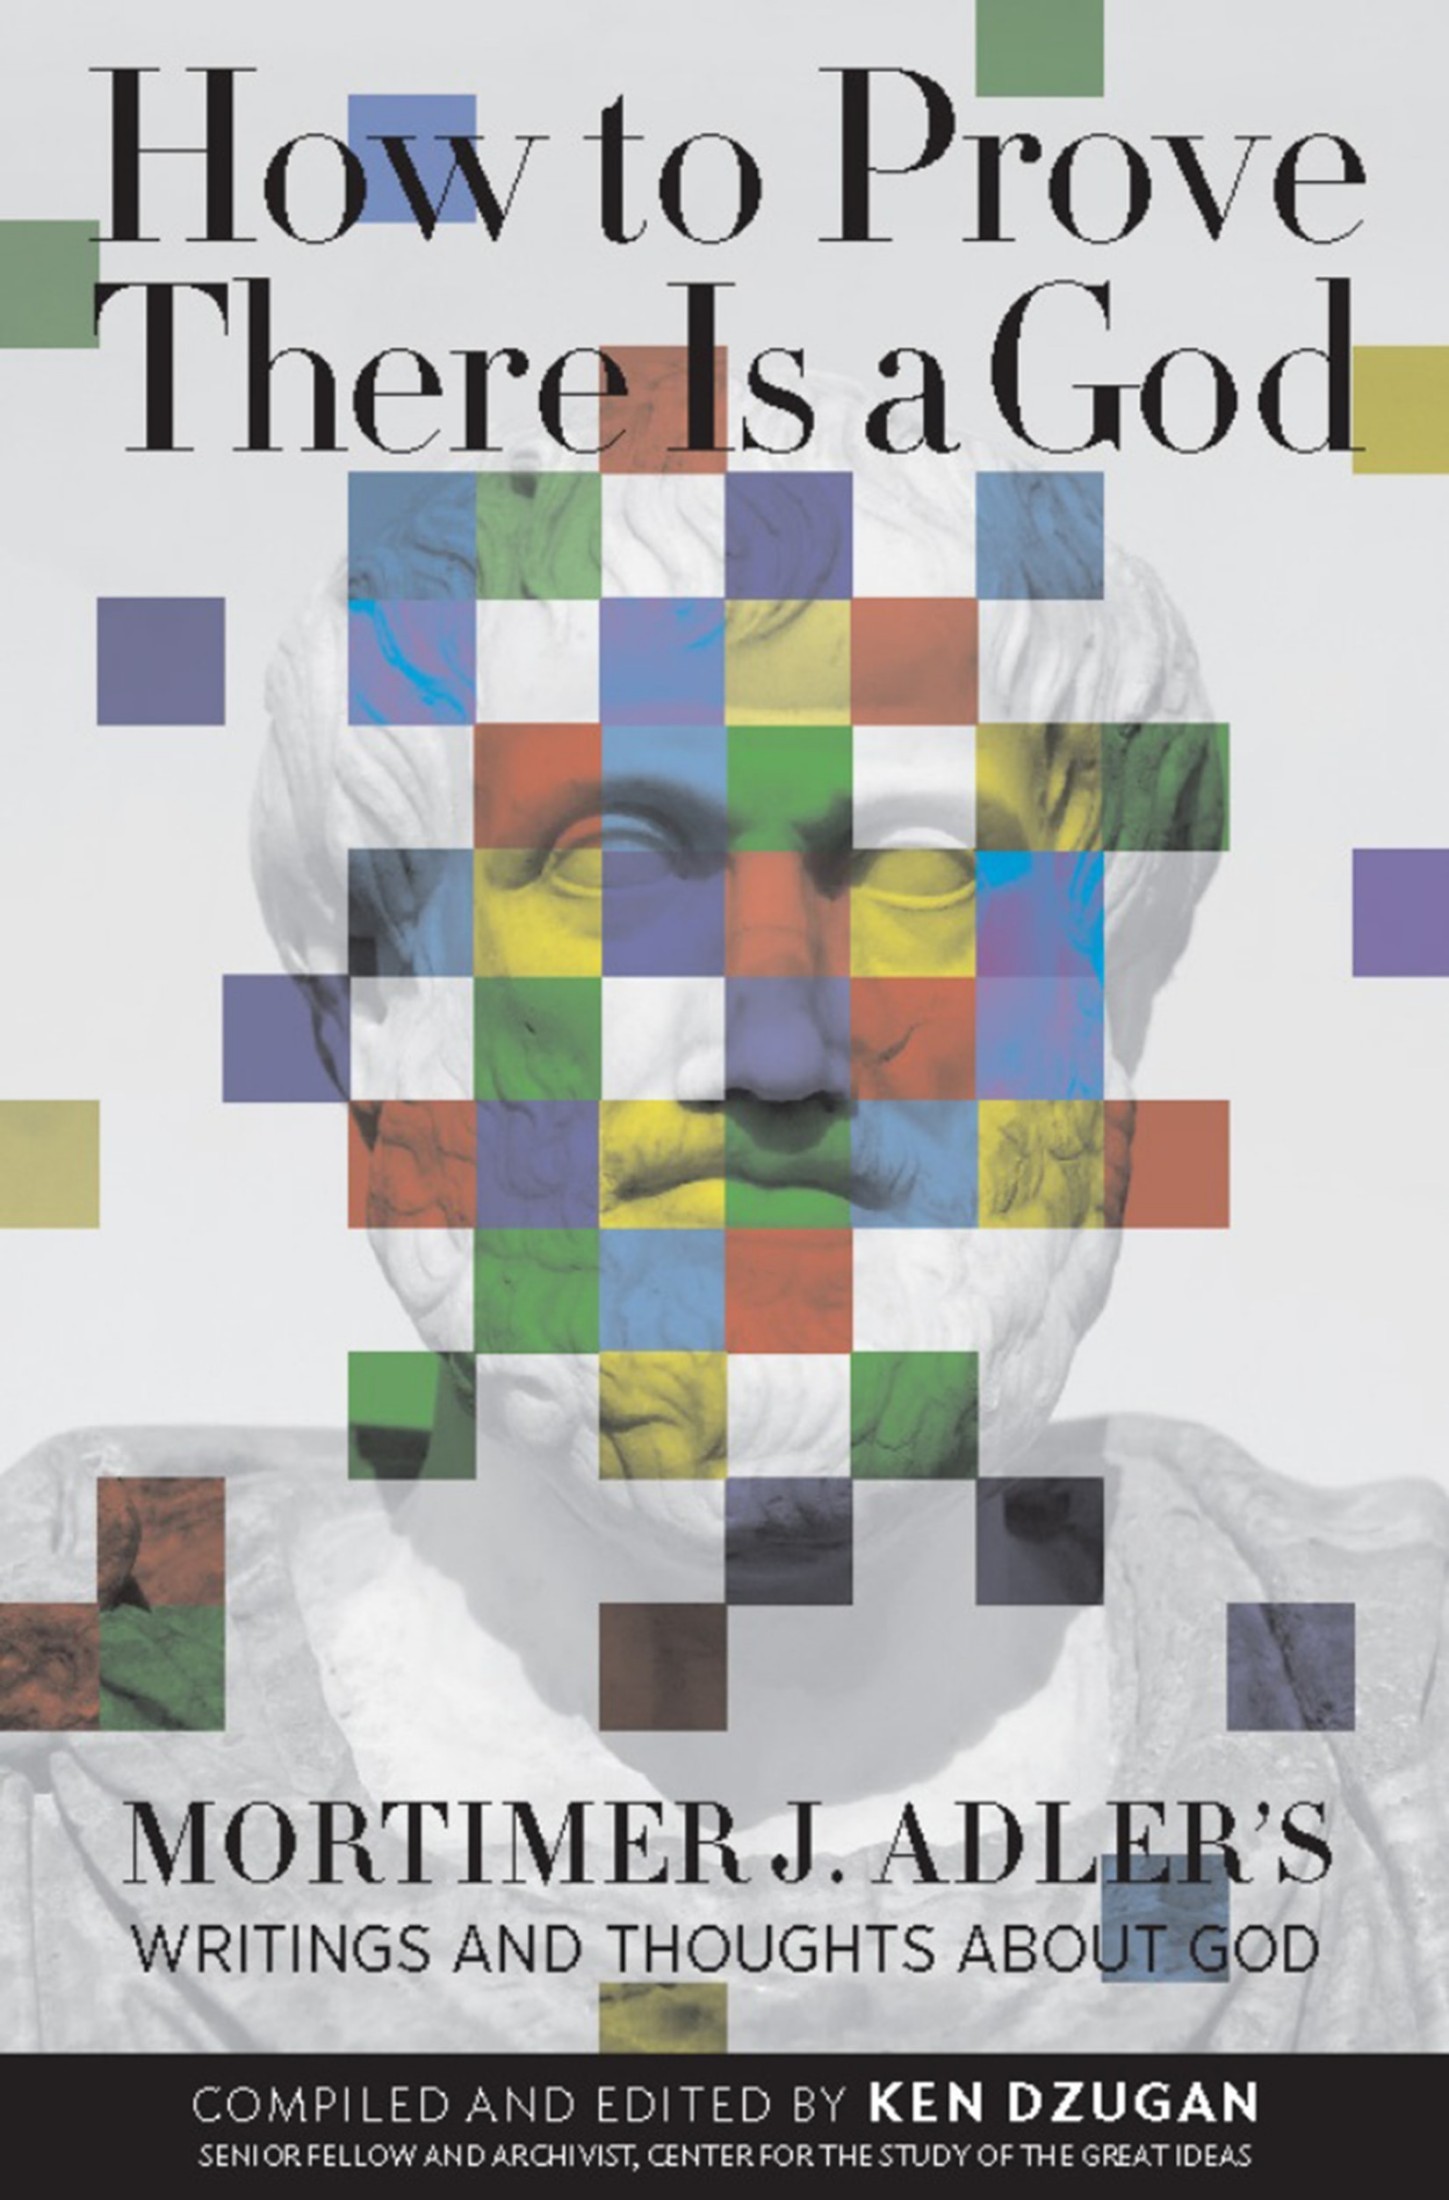 How to Prove There Is a God: Mortimer J. Adler's Writings and Thoughts About God